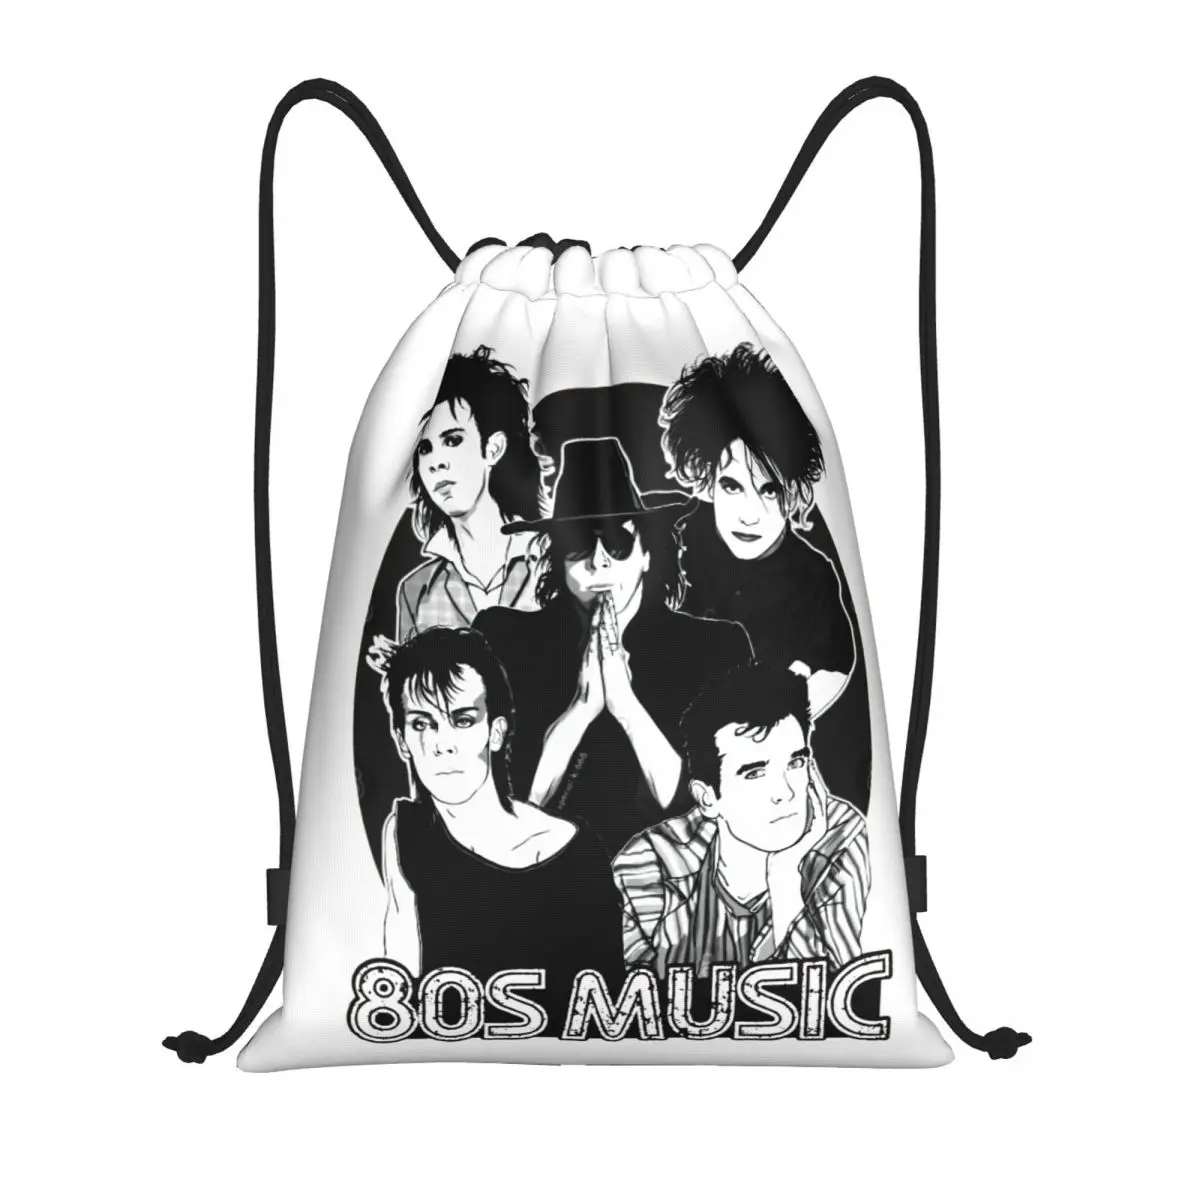 

The Cure Robert Smith Unique Drawstring Bags Gym Bag Infantry pack Lasting camps Backpack Size optional Retro Size optional Geek